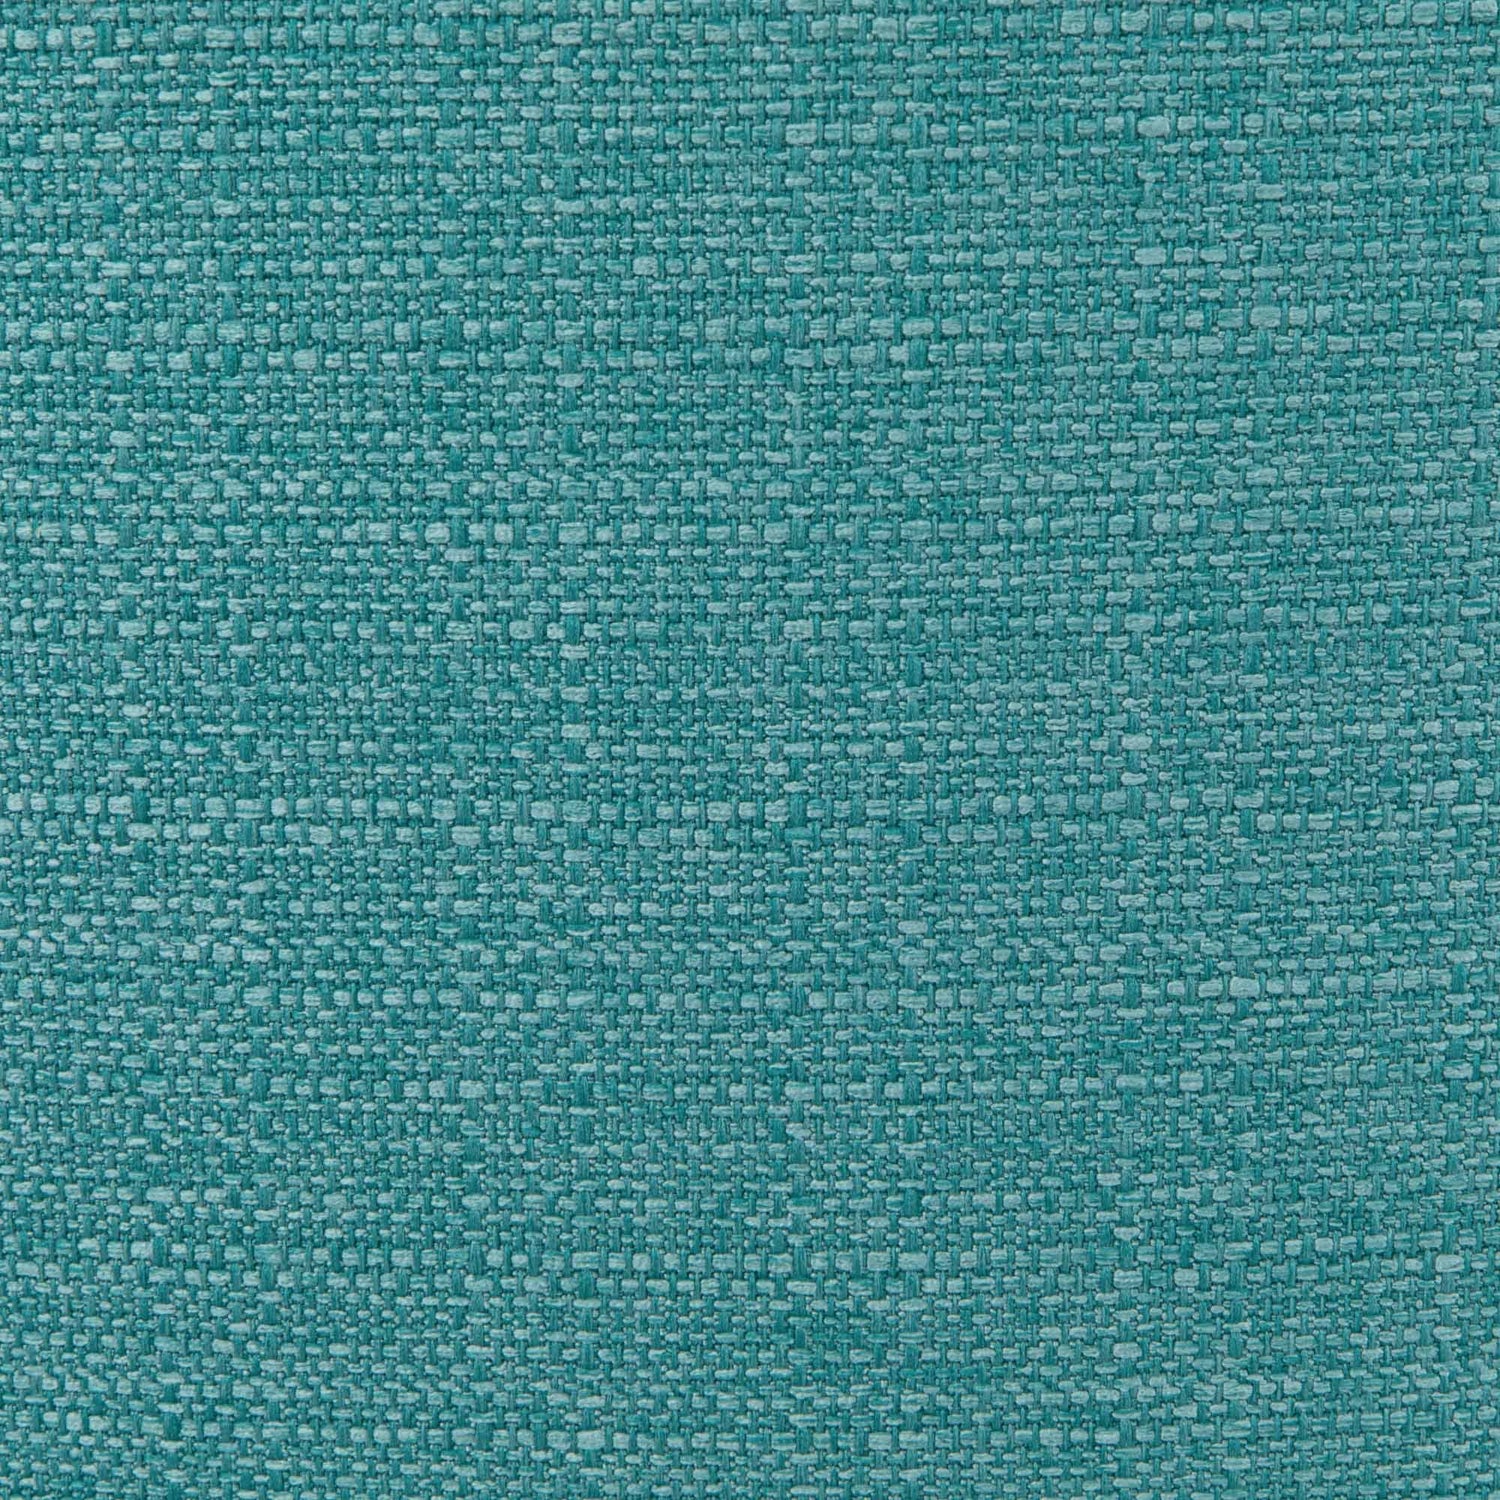 Turquoise Blue Woven Fabric | Malden IV 7 Piece Dining Set